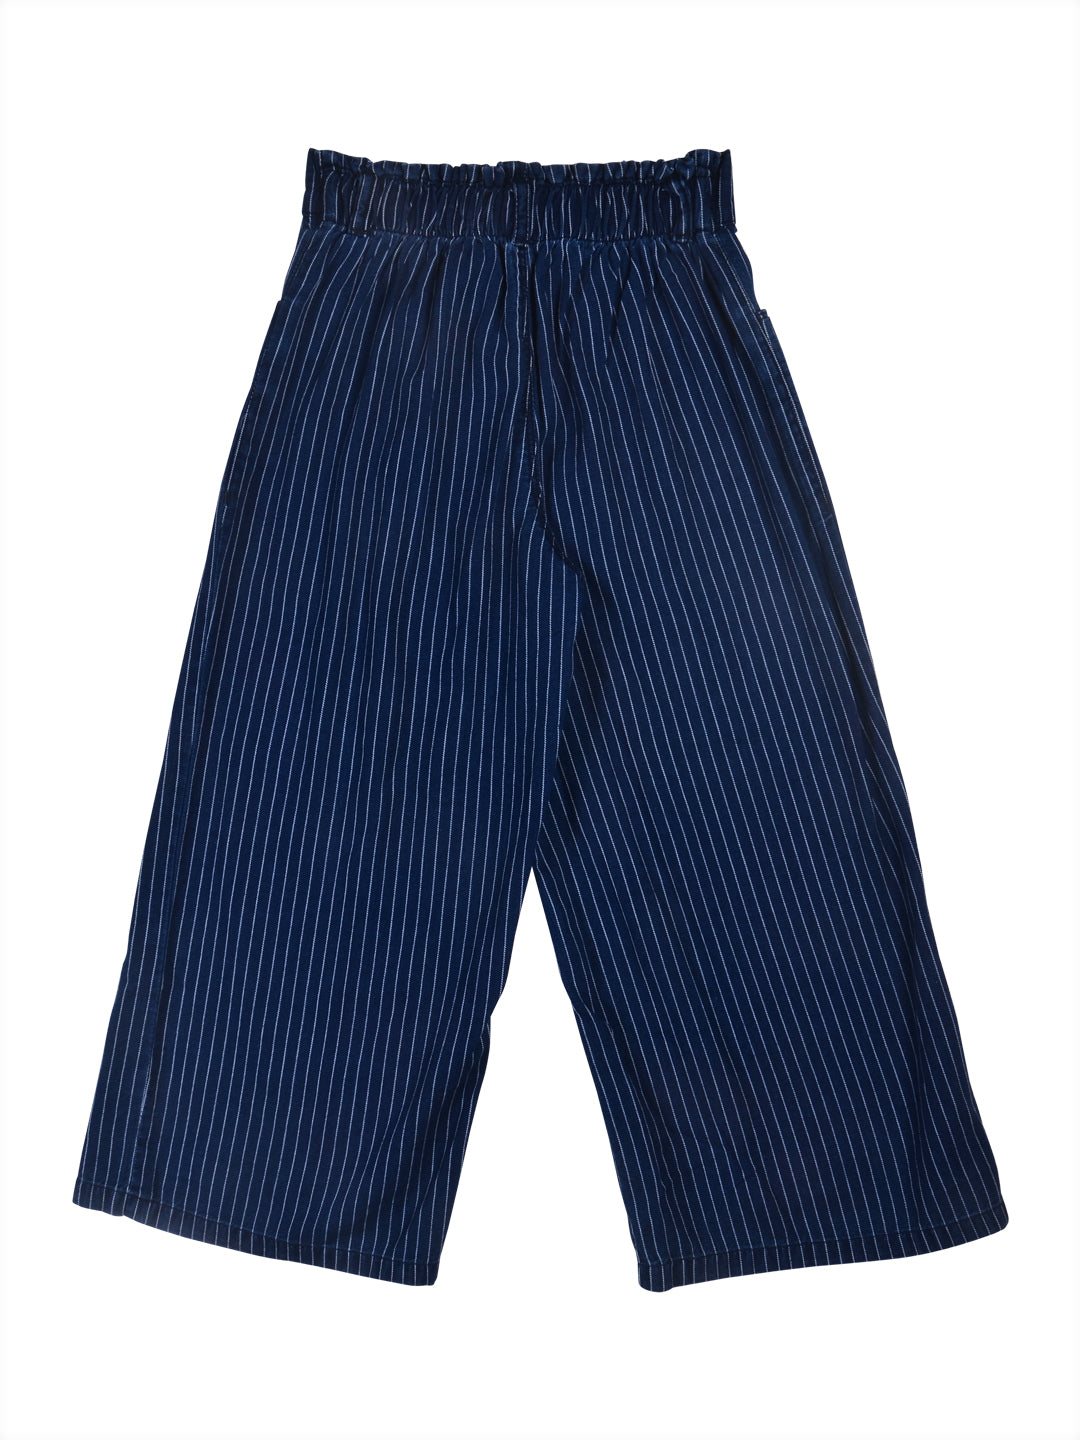 Girls Blue Cotton Striped Elasticated Culottes